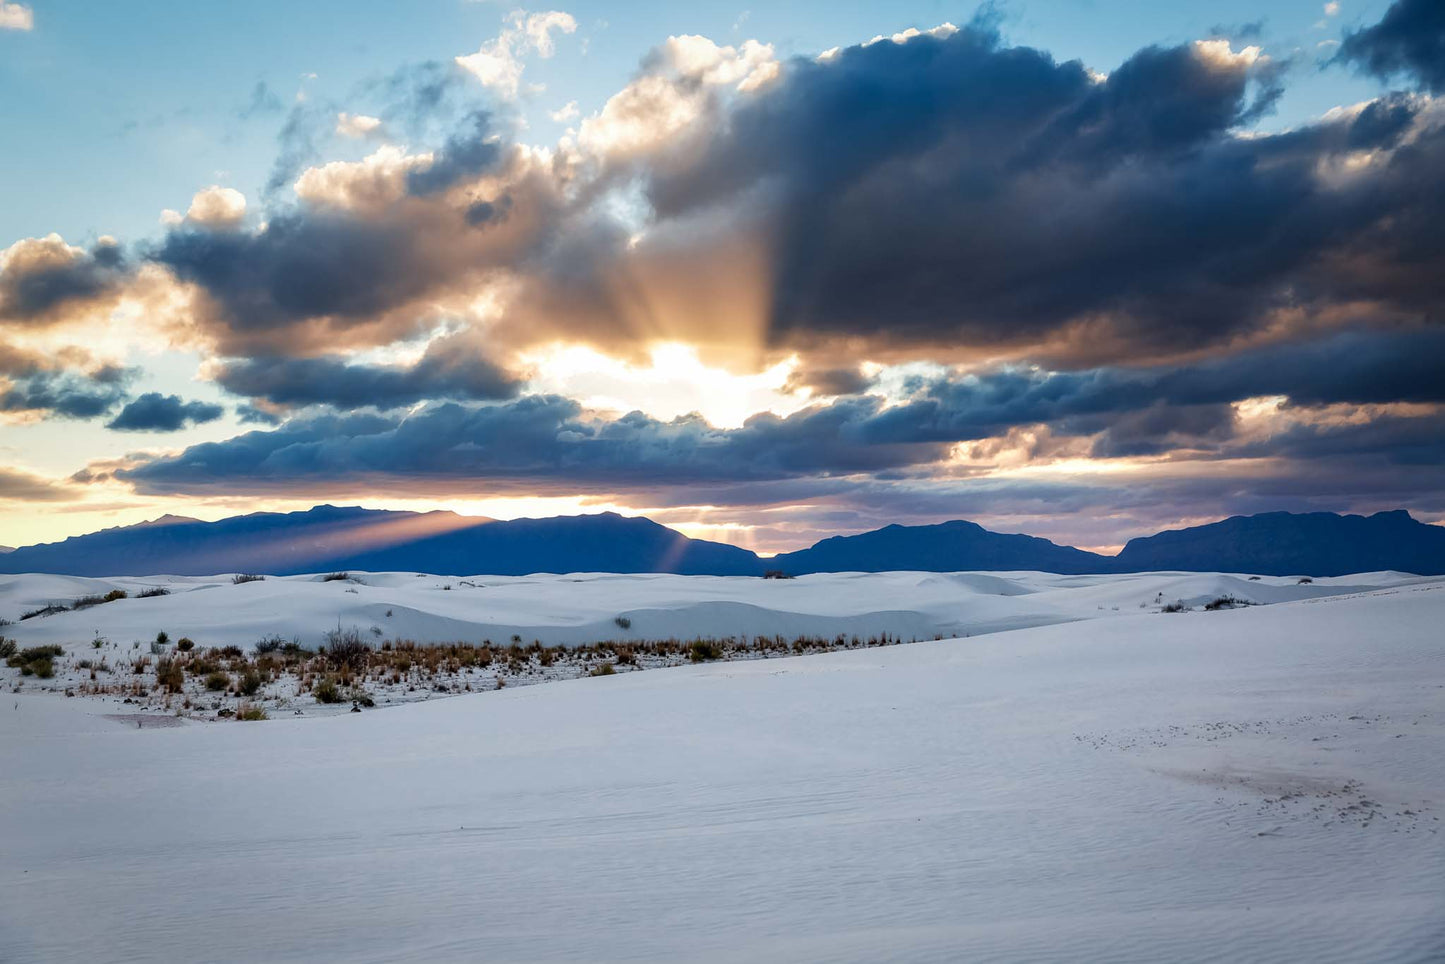 Desert southwest photography print of sunbeams bursting from behind clouds over the San Andres Mountains at White Sands National Park near Alamogordo, New Mexico by Sean Ramsey of Southern Plains Photography.